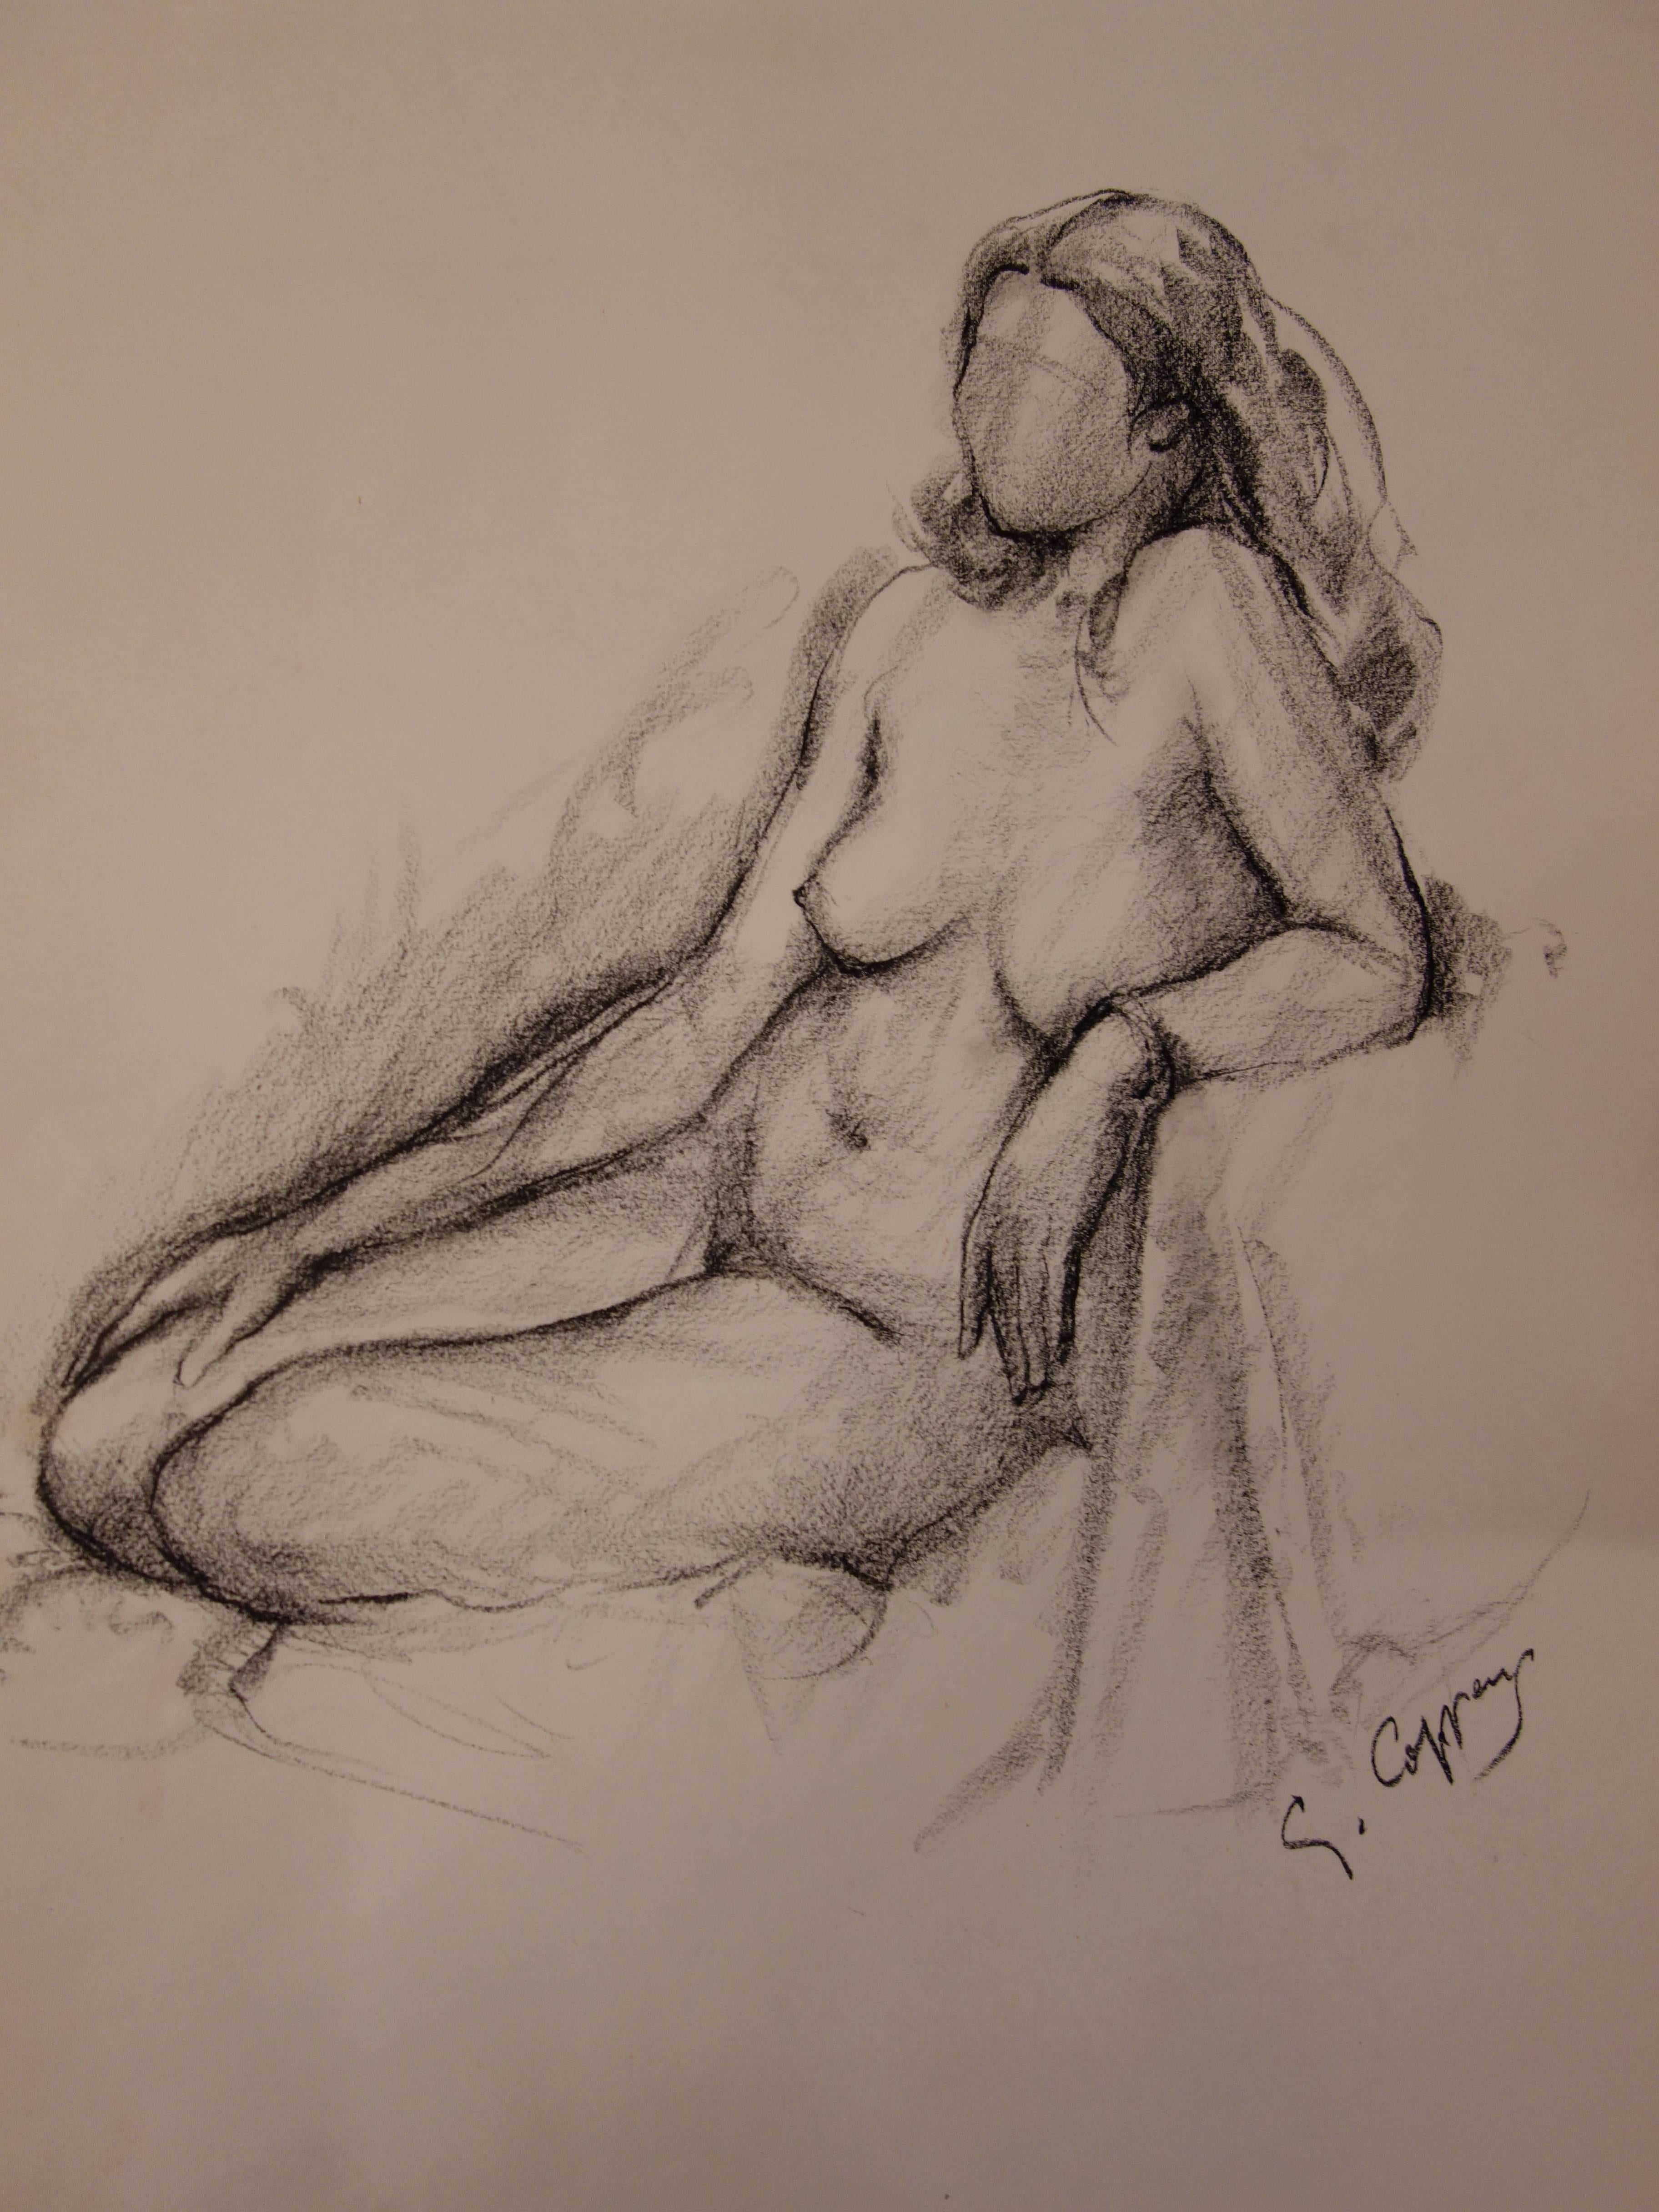 Gaston COPPENS (1909 - 2002)
Nude on a Chair 

Original charcoal drawing
Signed in the bottom right
Stamp of the artist on the back
On drawing paper 52 x 43 cm (c 21 x 17 inch)

Excellent condition

Gaston Coppens studied sculpture in the